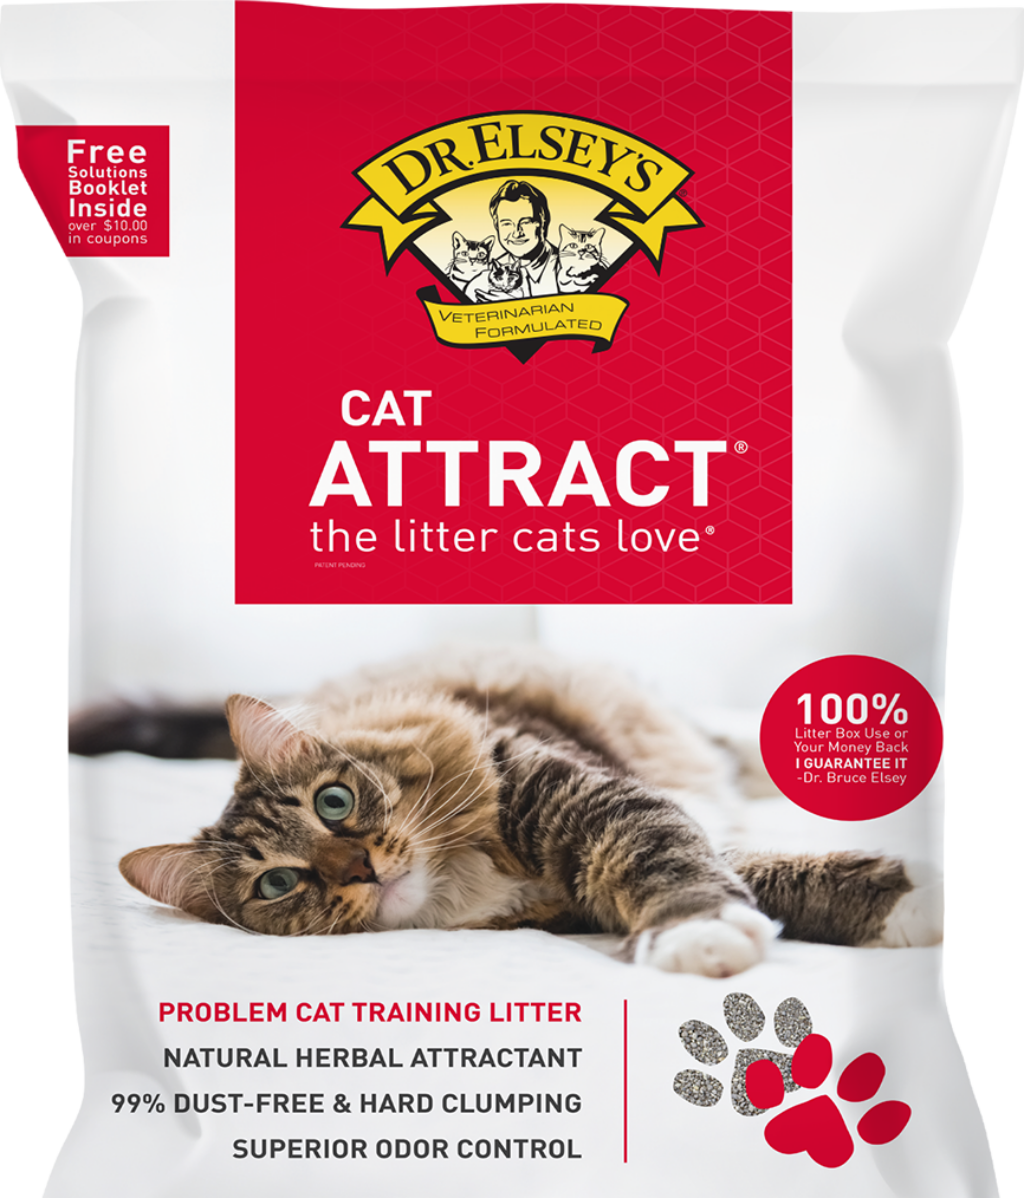 Bag of Dr. Elsey's Cat Attract litter